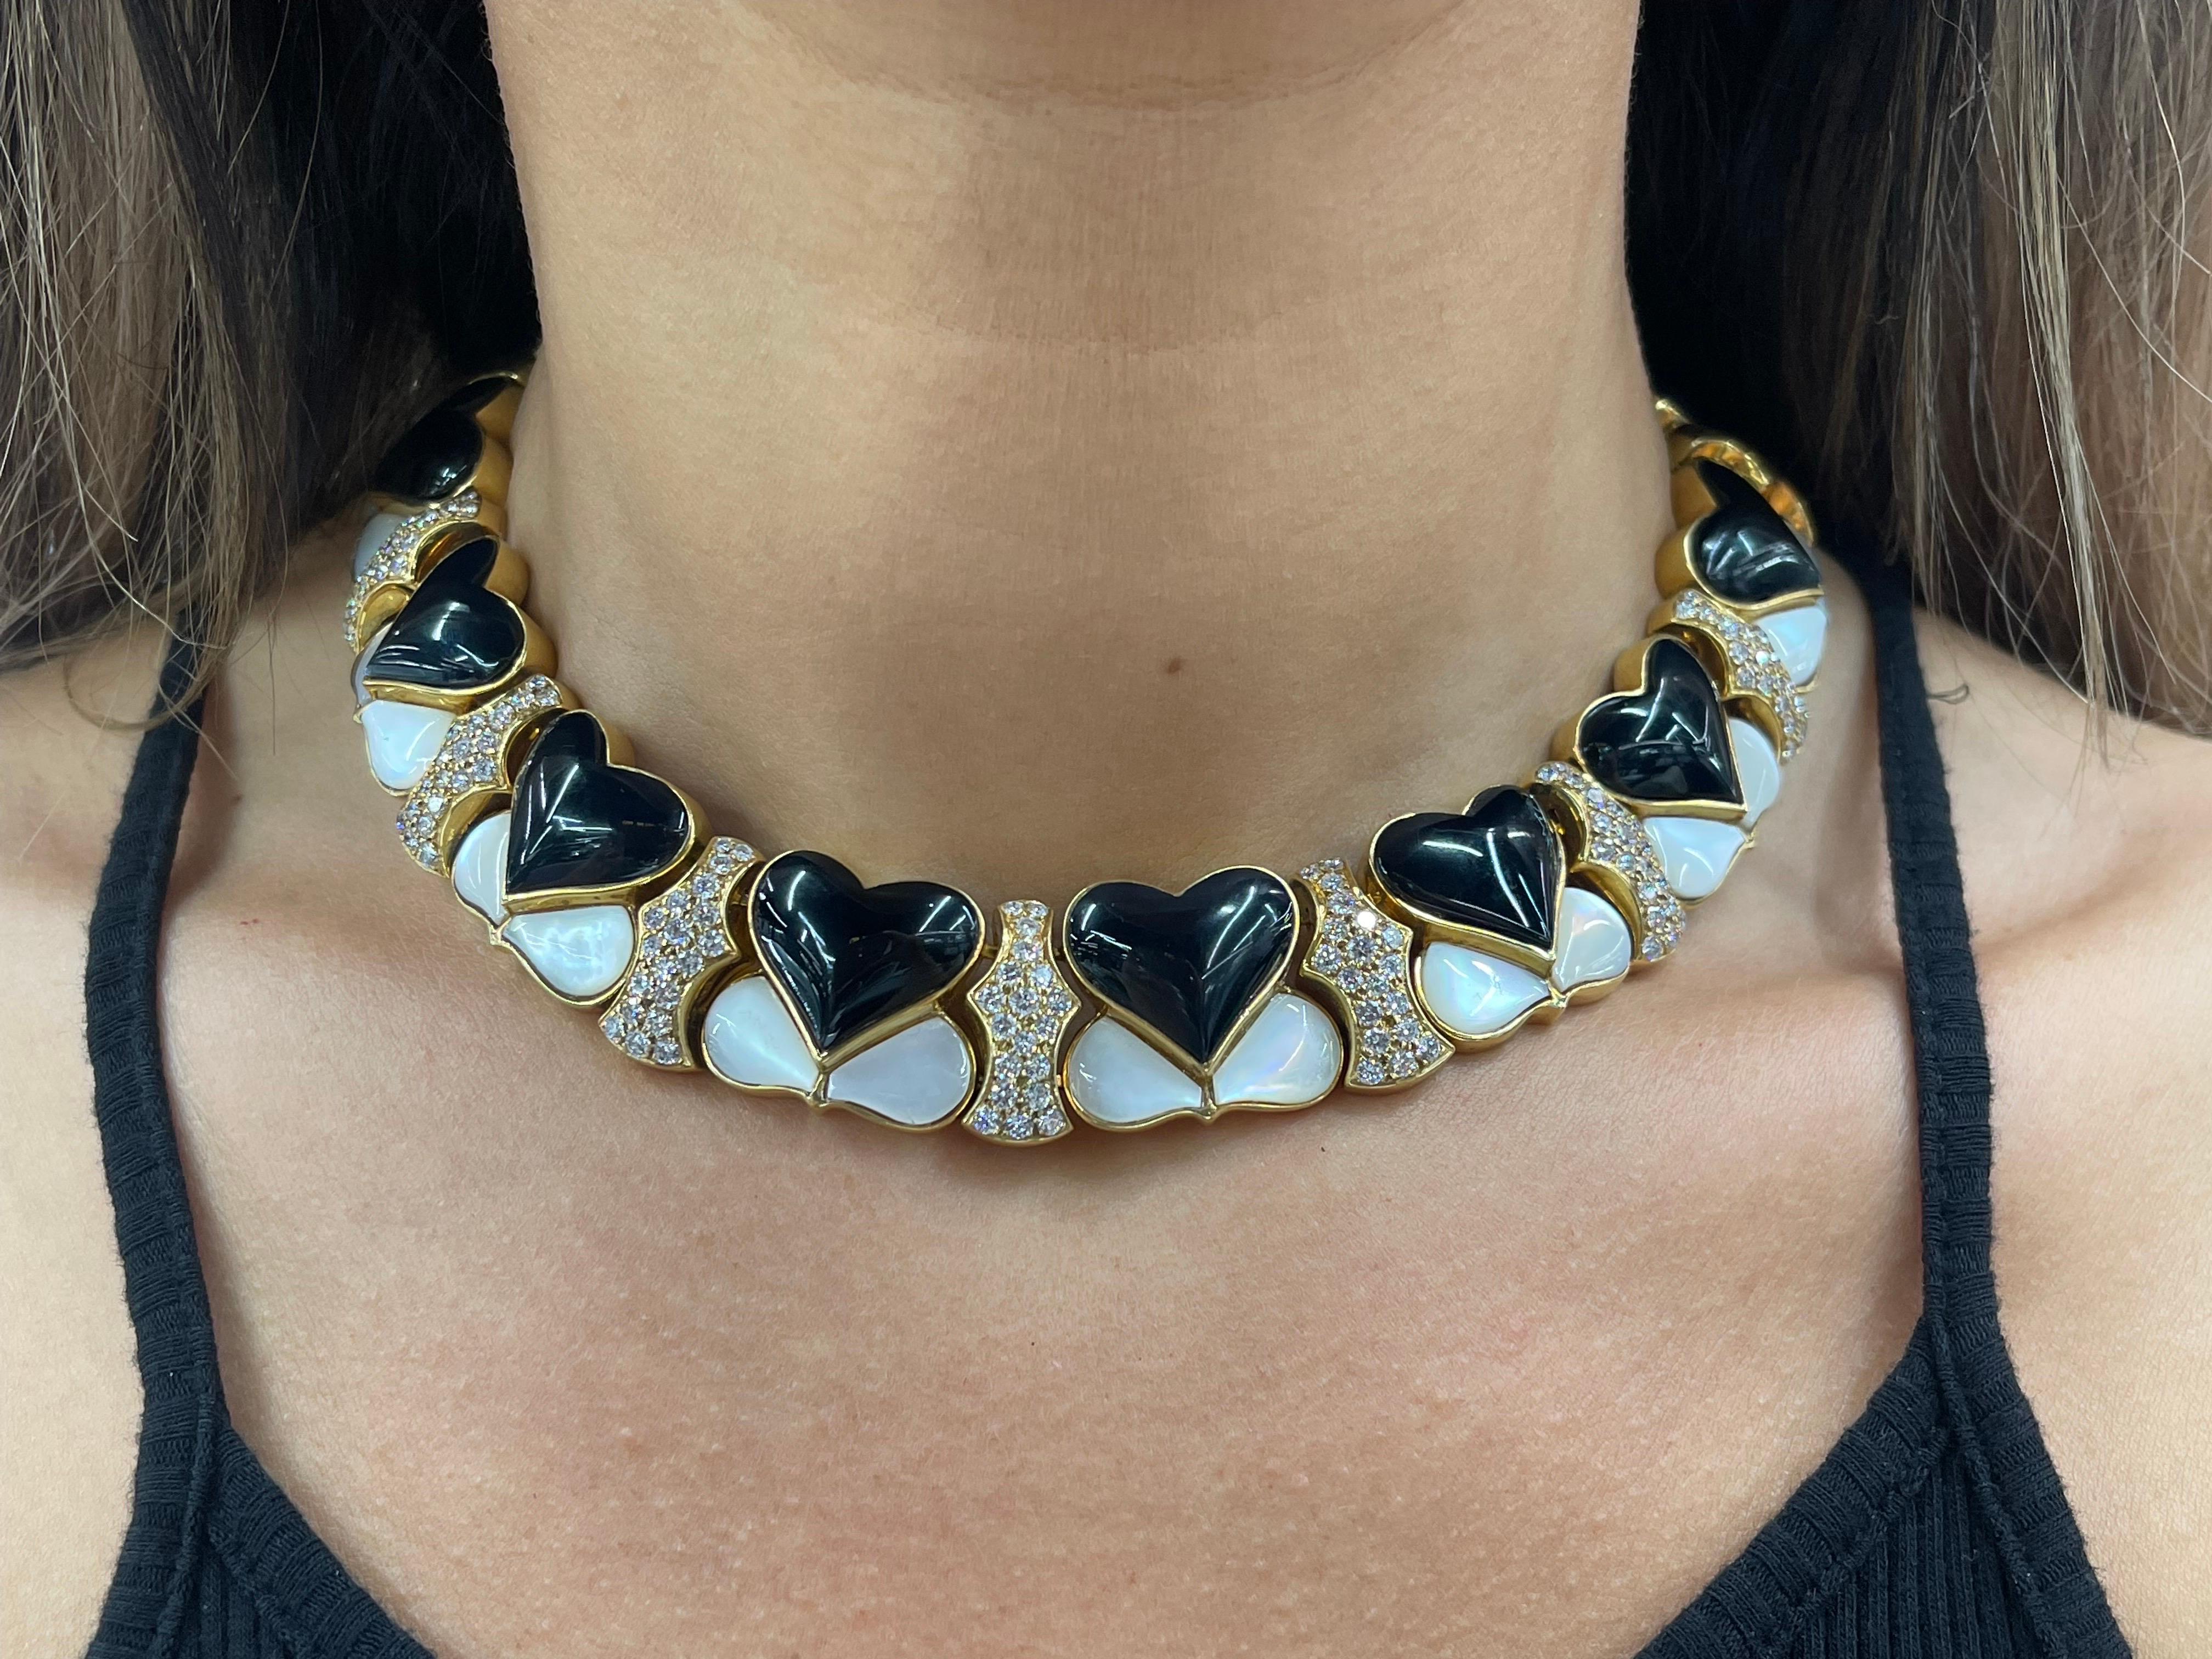 18 Karat Yellow Gold wide collar necklace featuring Onyx Hearts, decorative Moonstones and 133 round brilliants weighing approximately 6 carats.
A great conversation piece! 